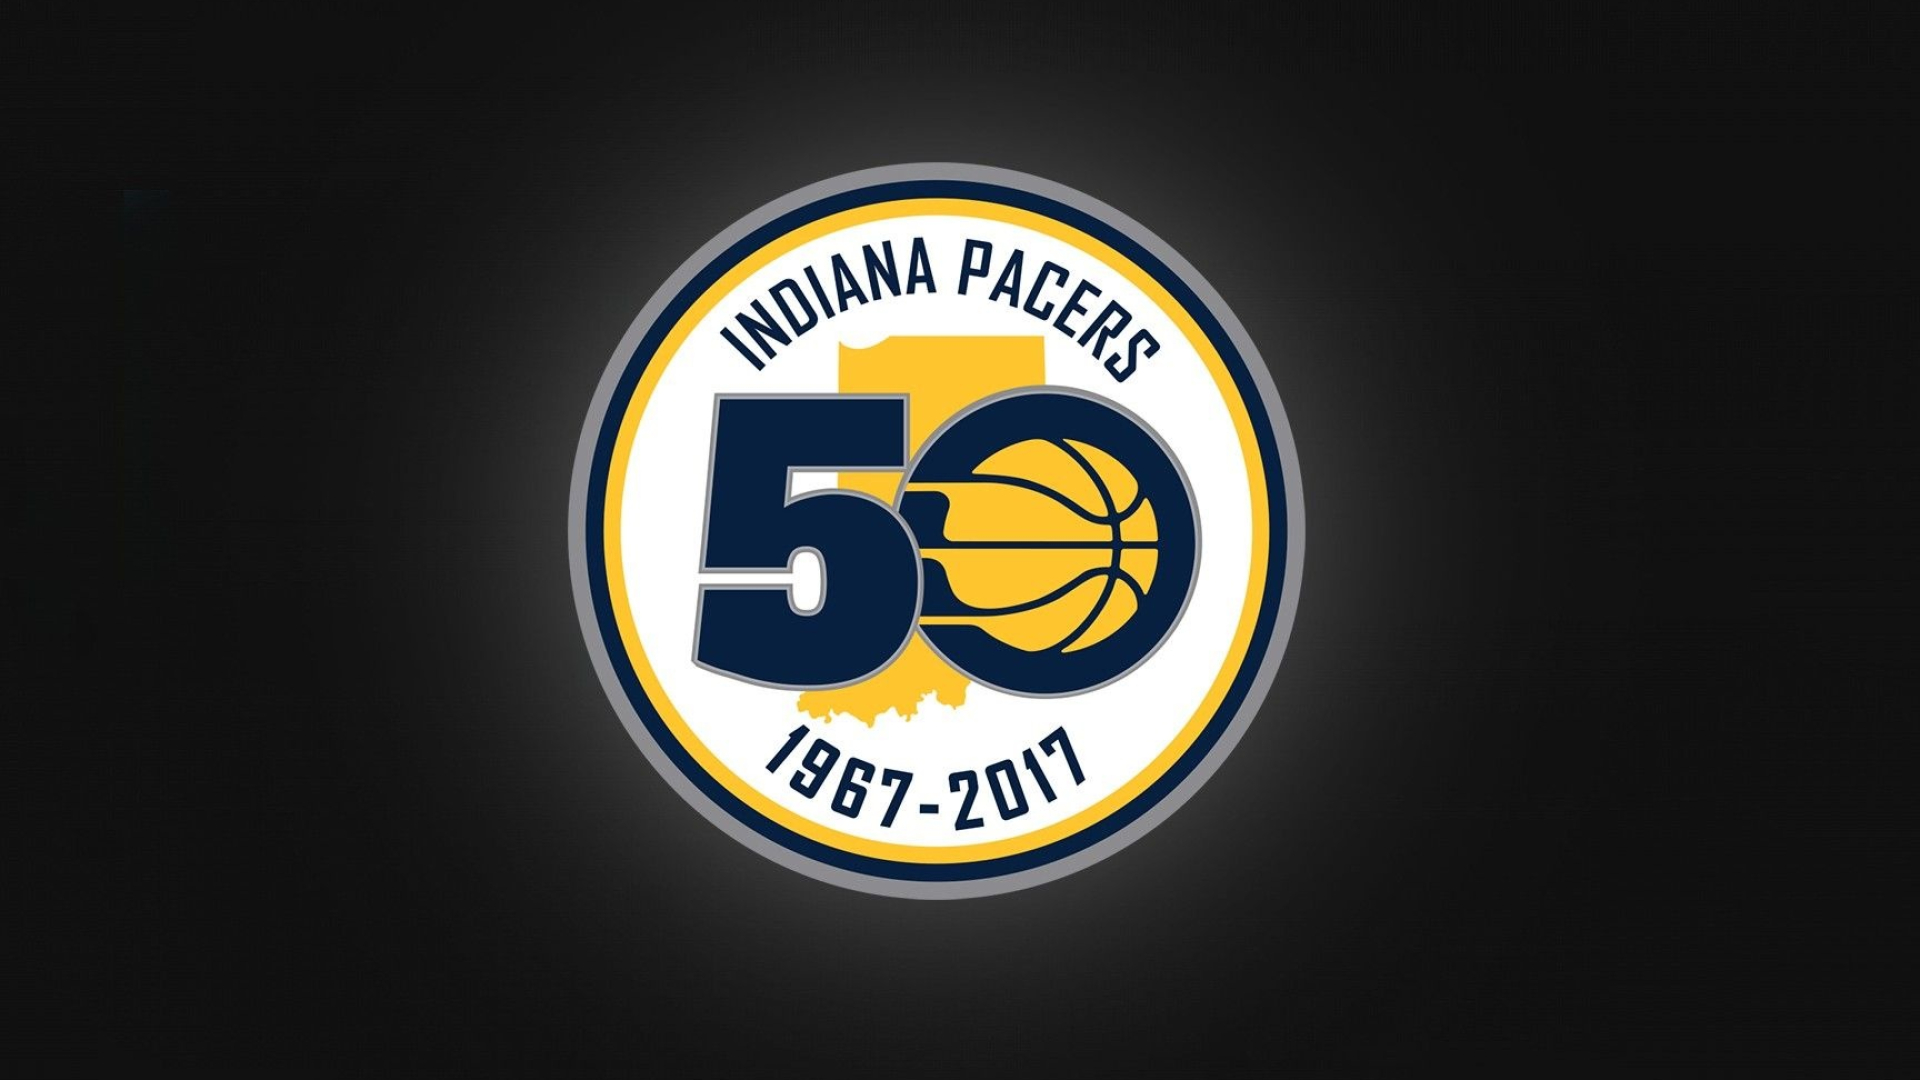 Indiana Pacers, wallpapers, top free, backgrounds, 1920x1080 Full HD Desktop